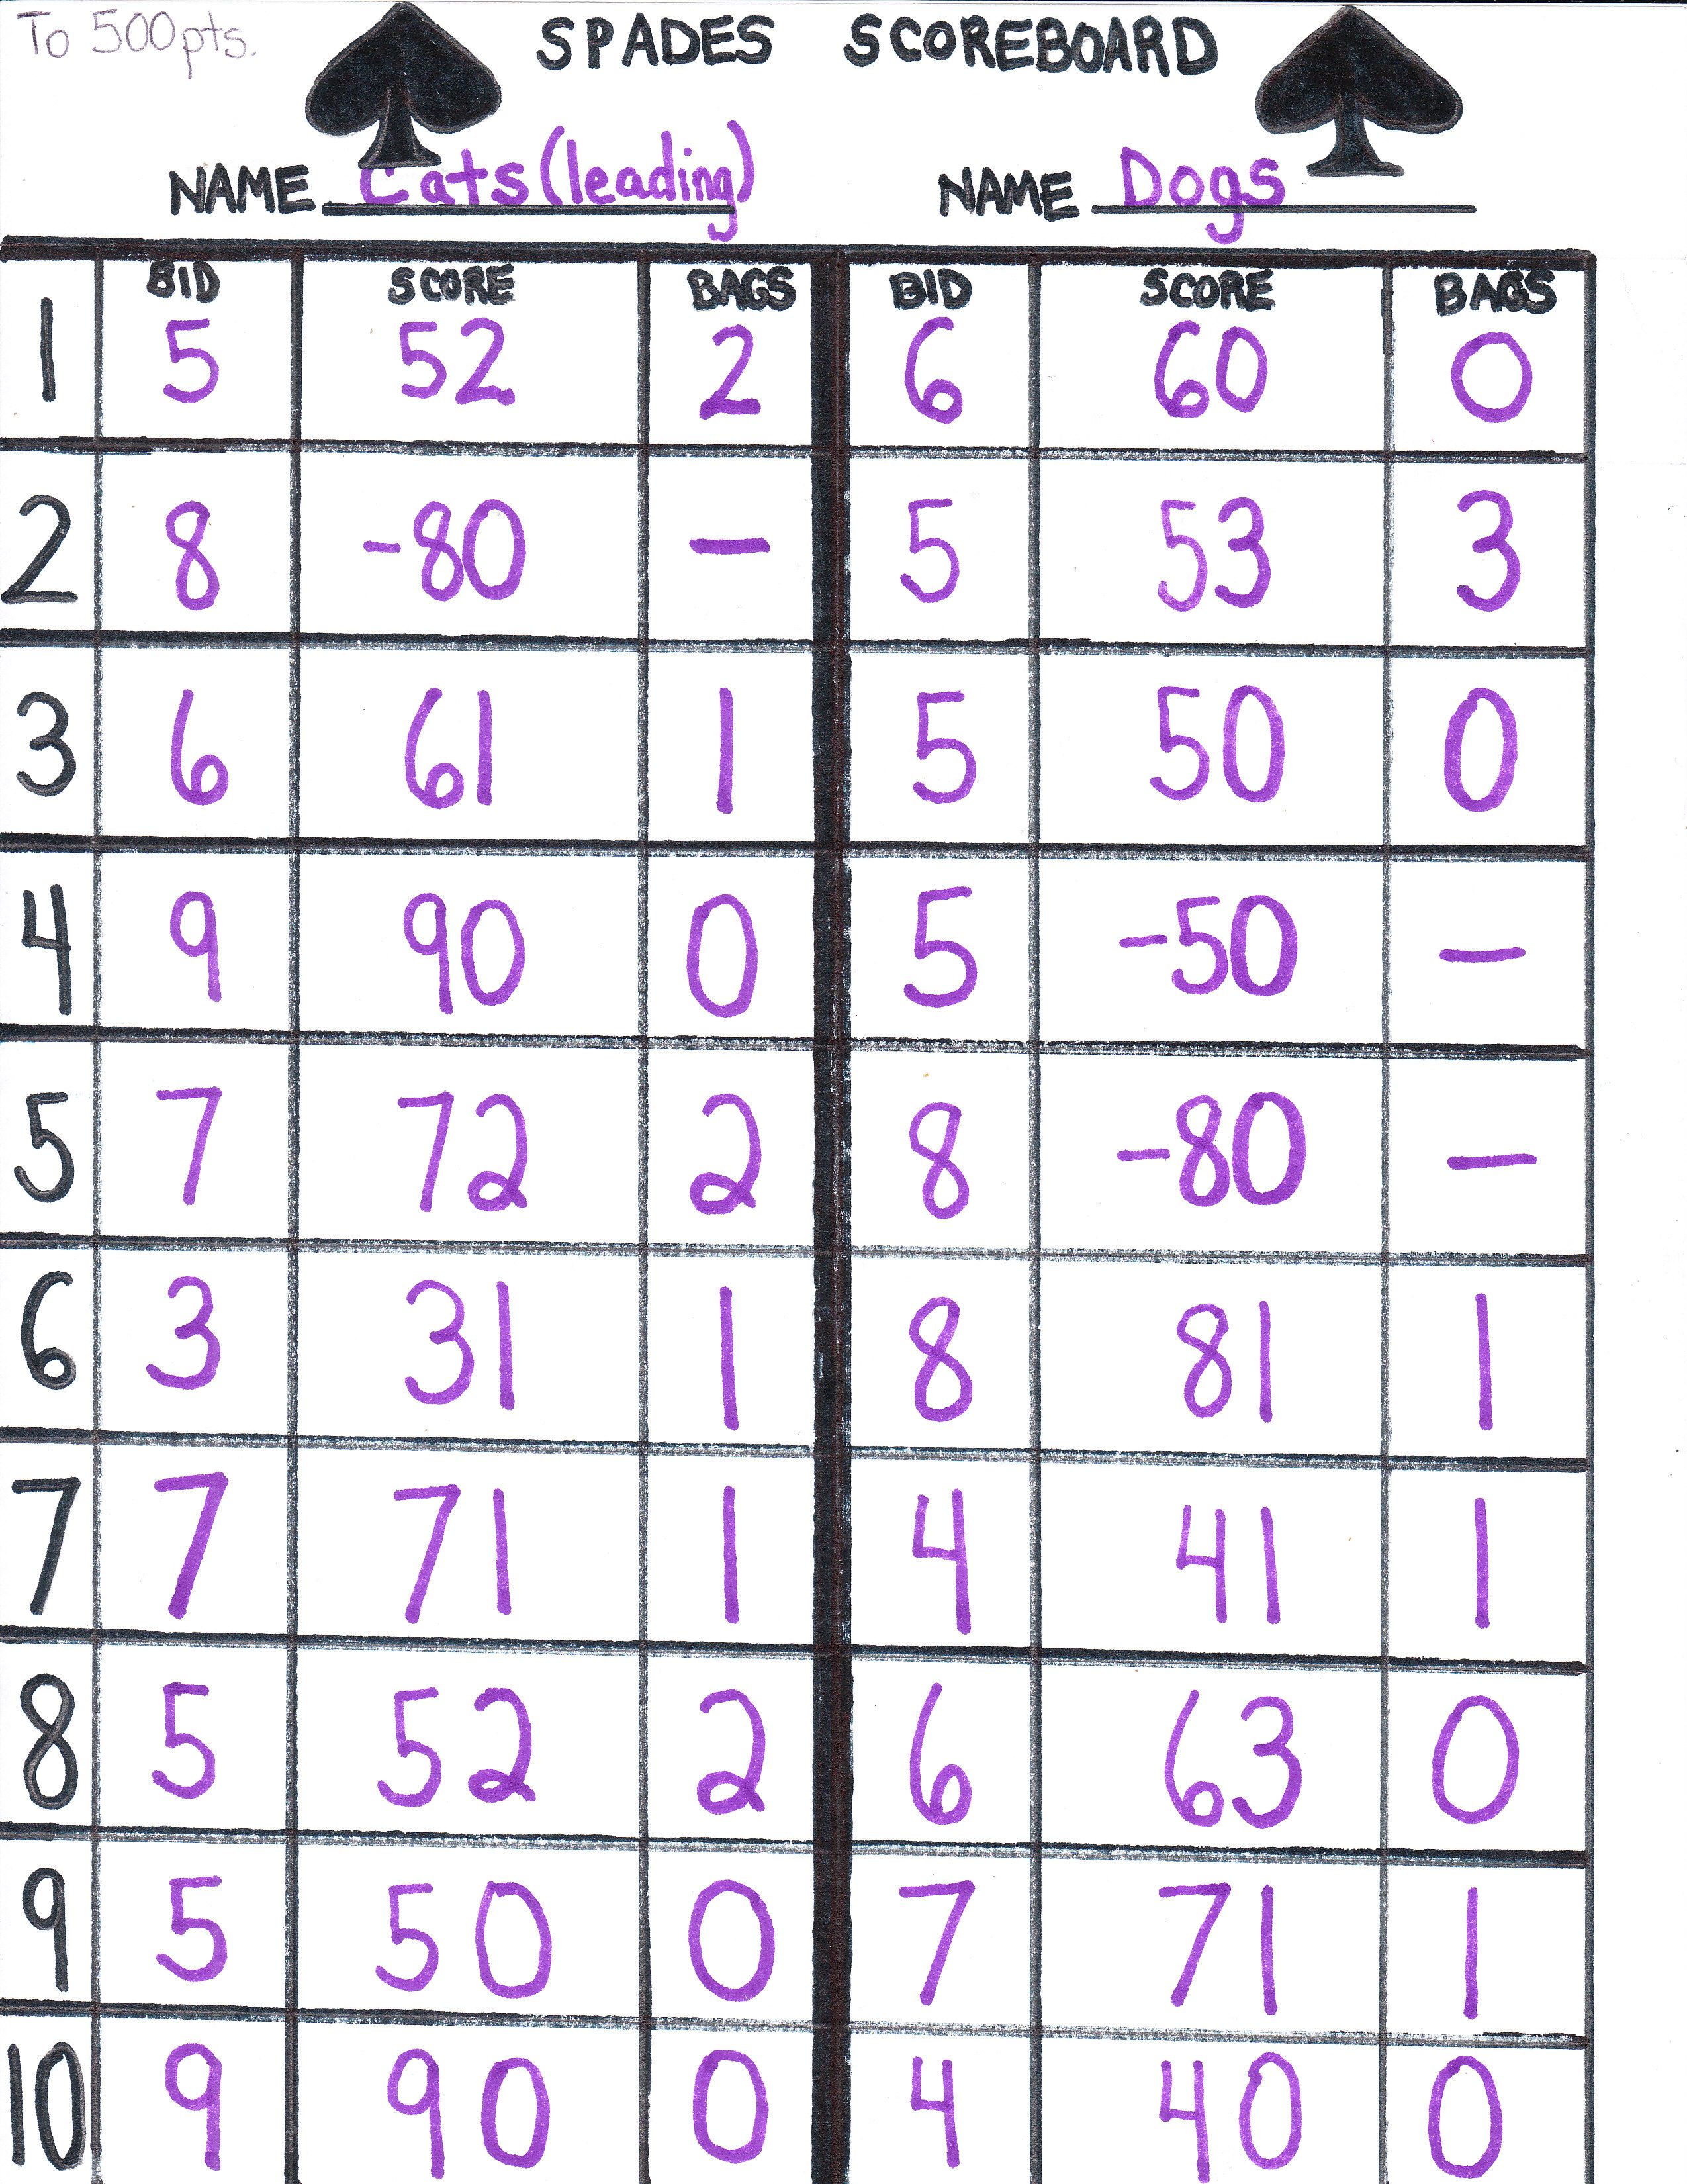 An example of a completed Spades Scoresheet